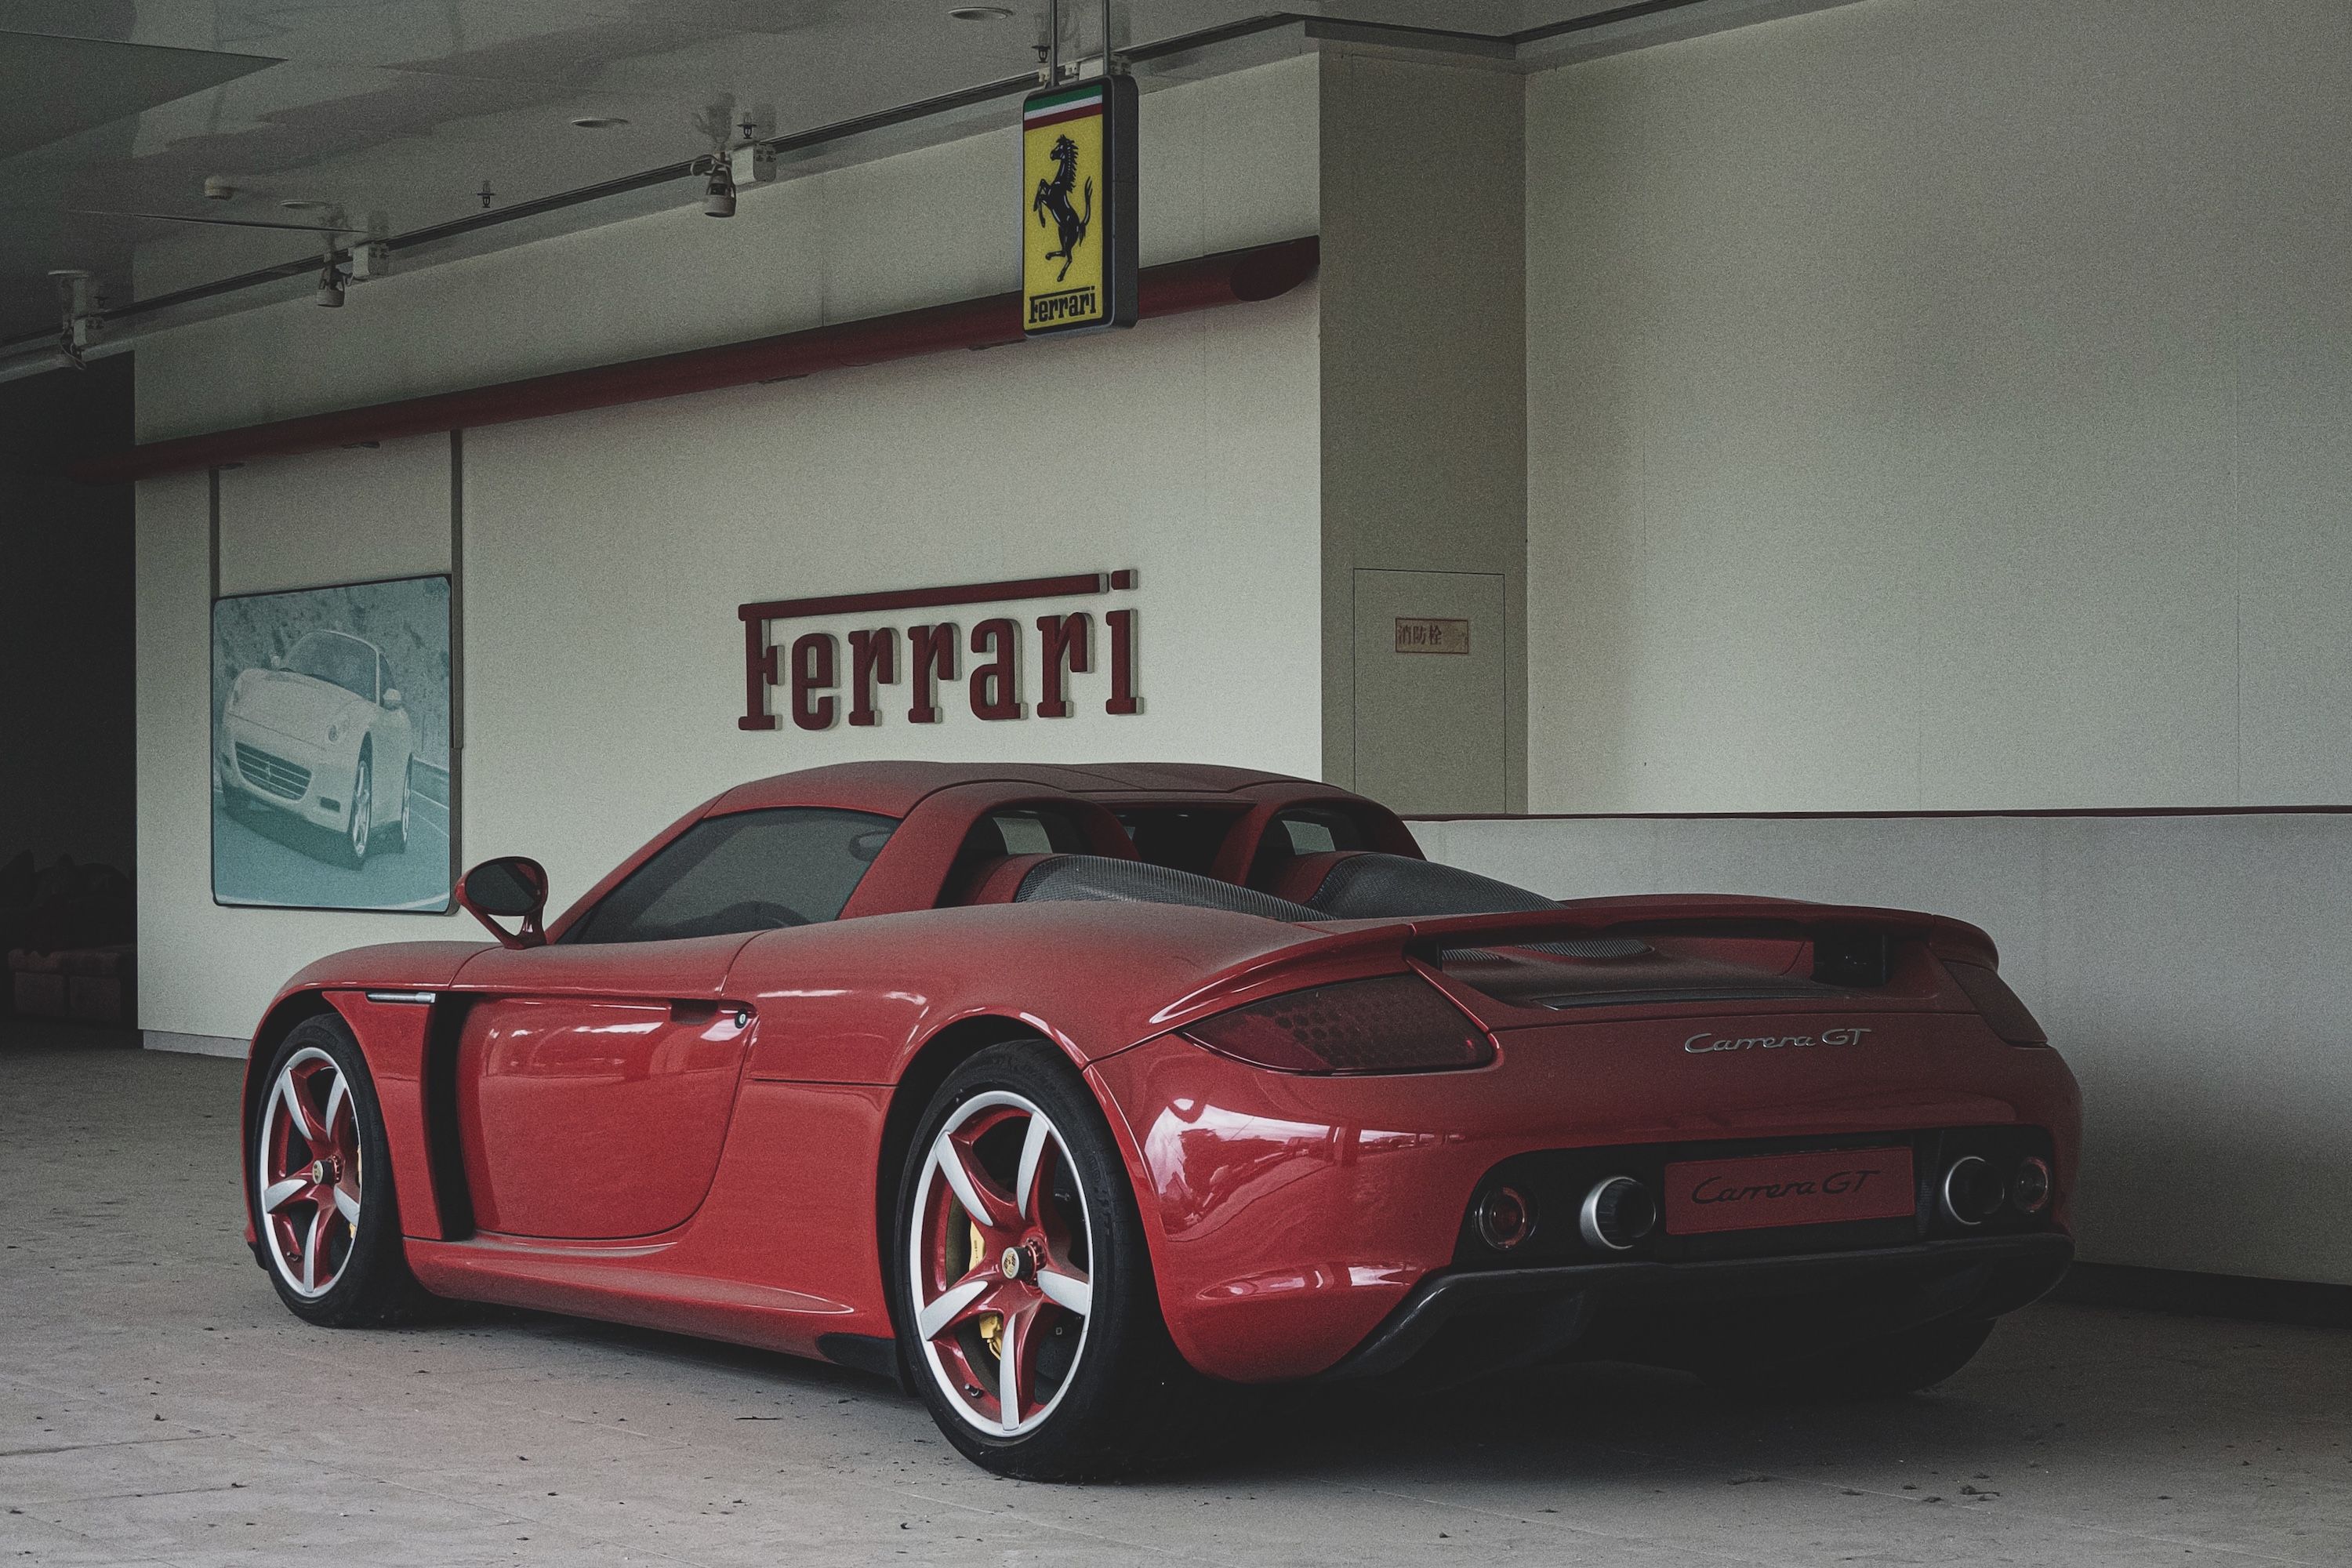 This Carrera GT Trapped in an Abandoned Chinese Dealership